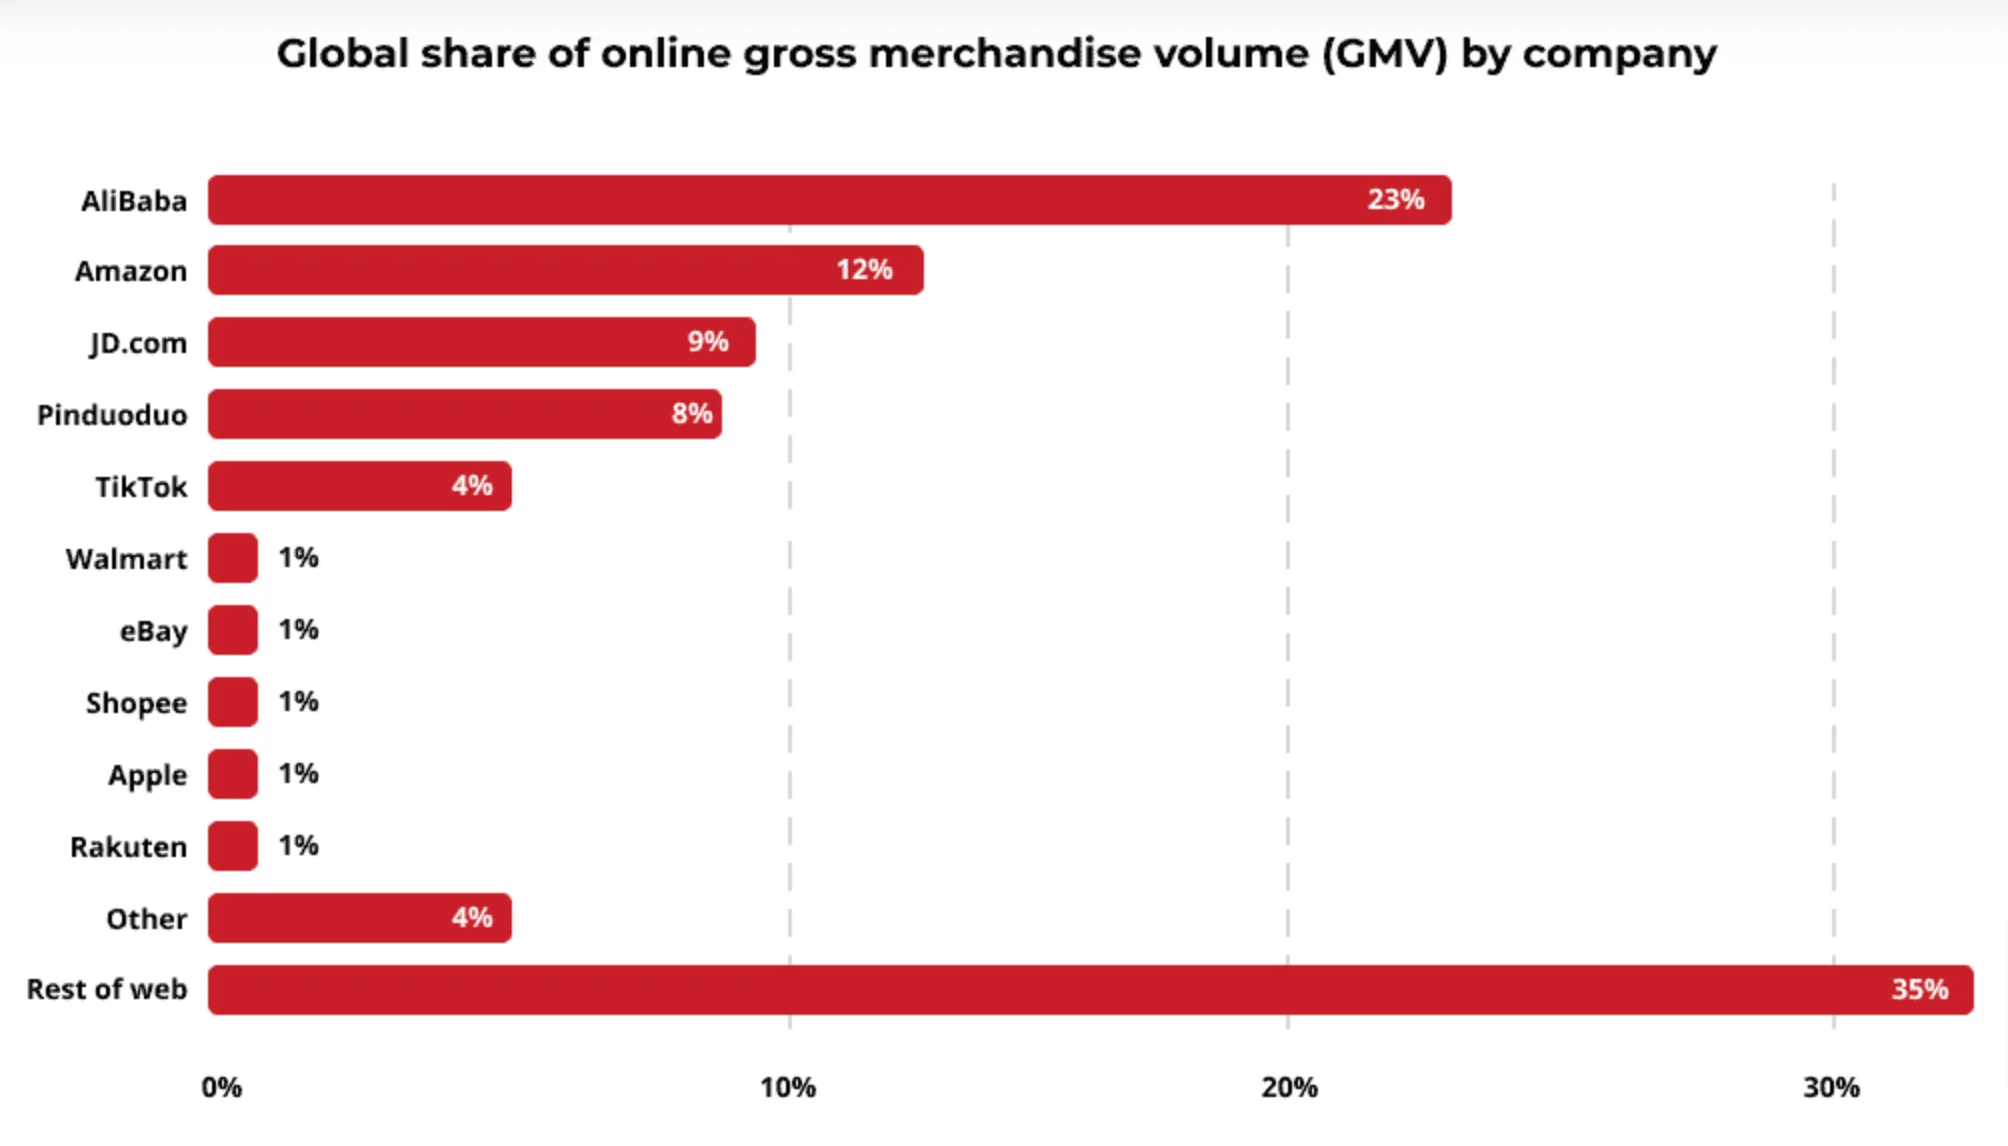 Marketplaces or ecommerce website hold a big market share of online shopping